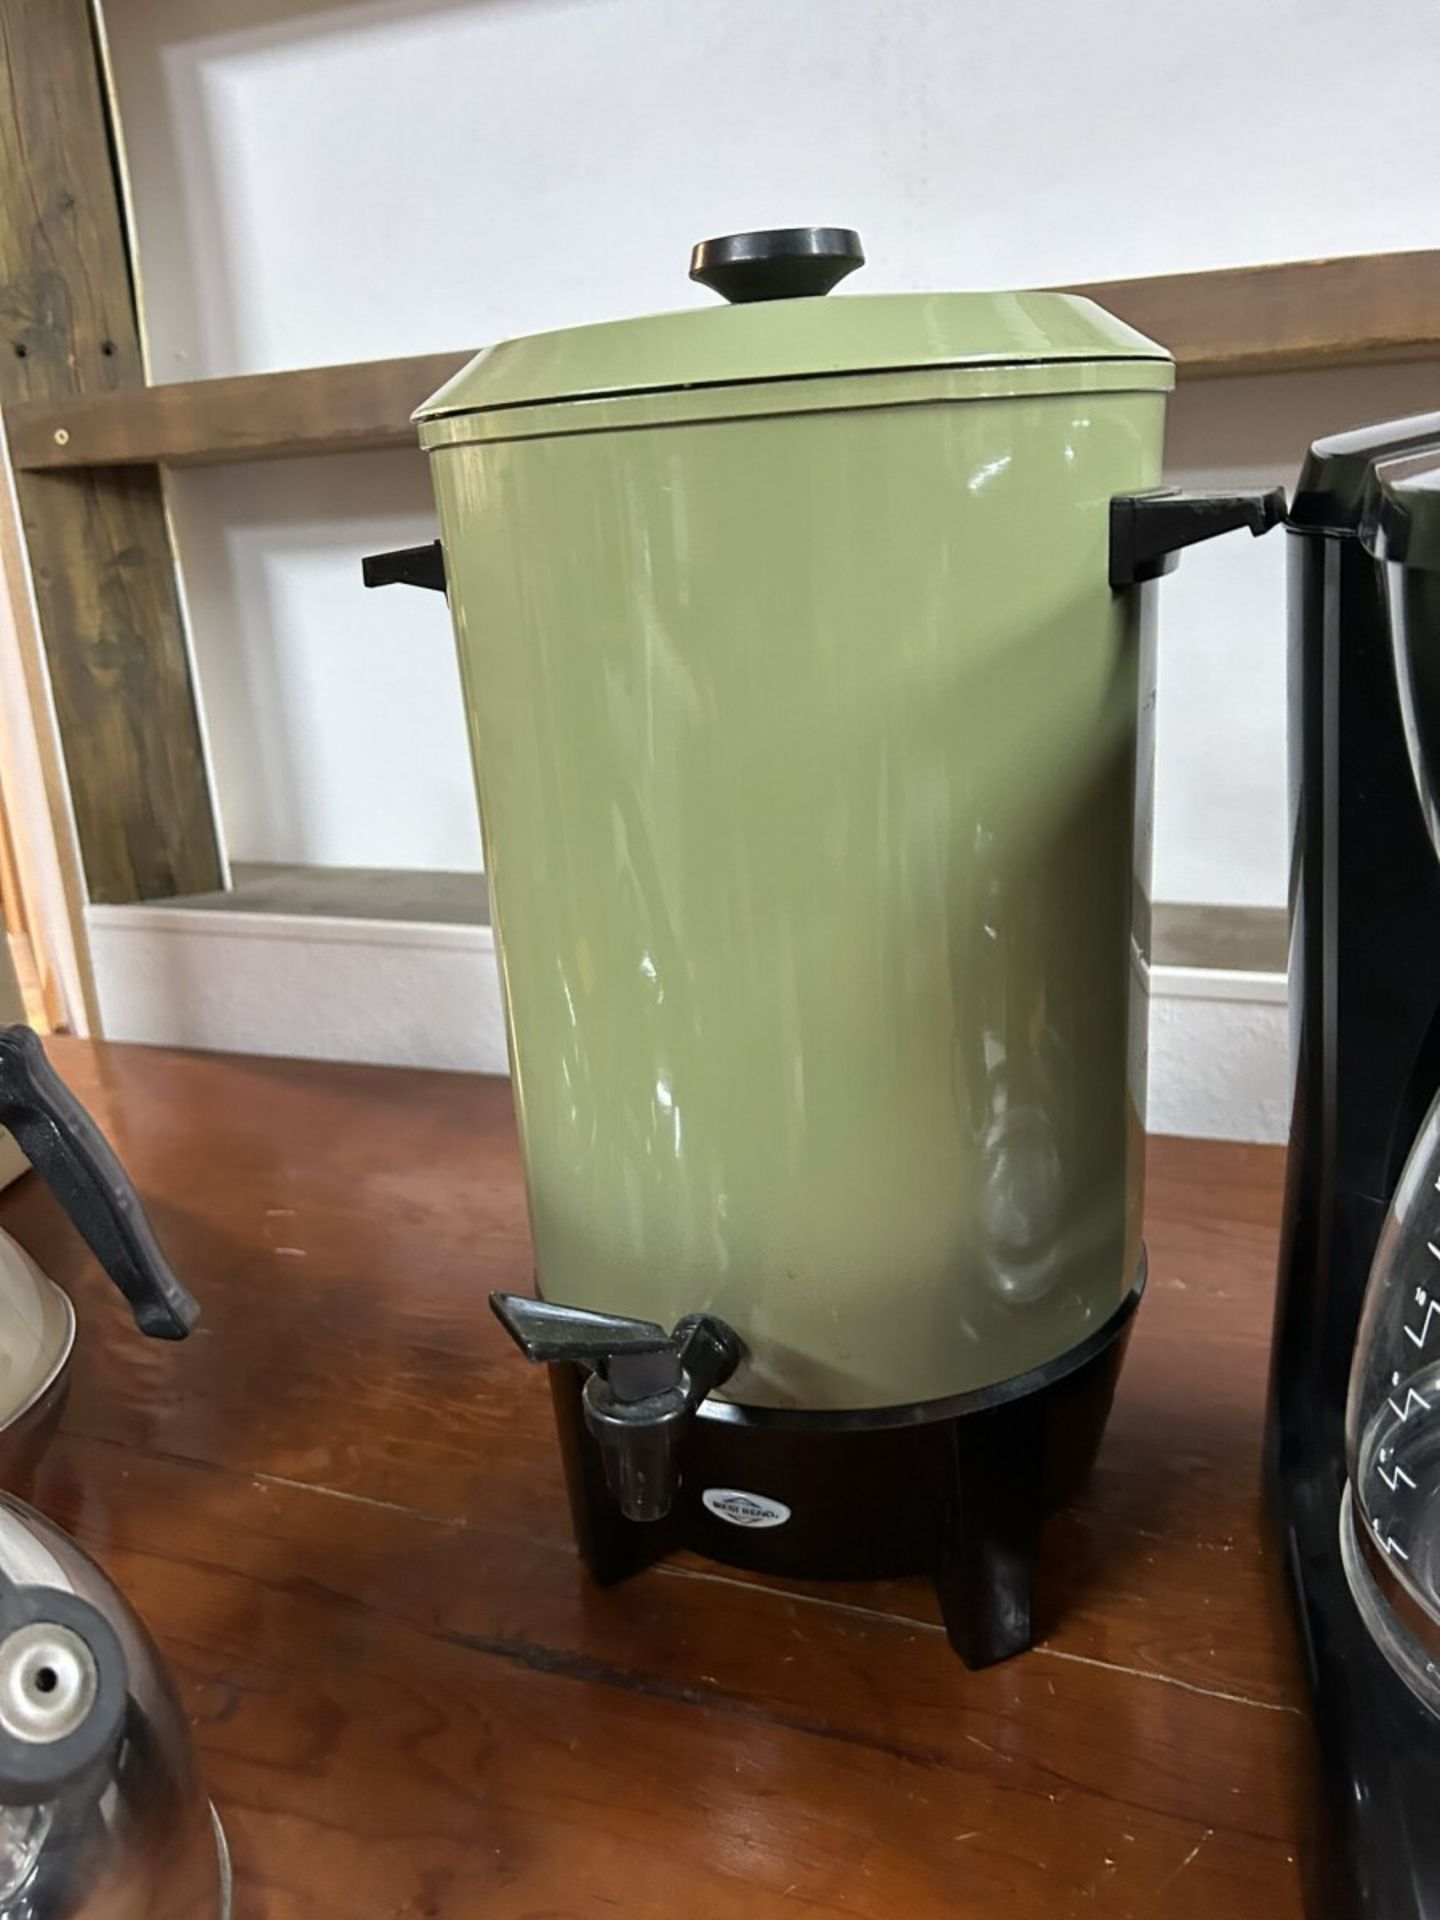 2 ELECTRIC COFFEE MAKERS, FILTERS, TEA KETTLE - Image 2 of 5